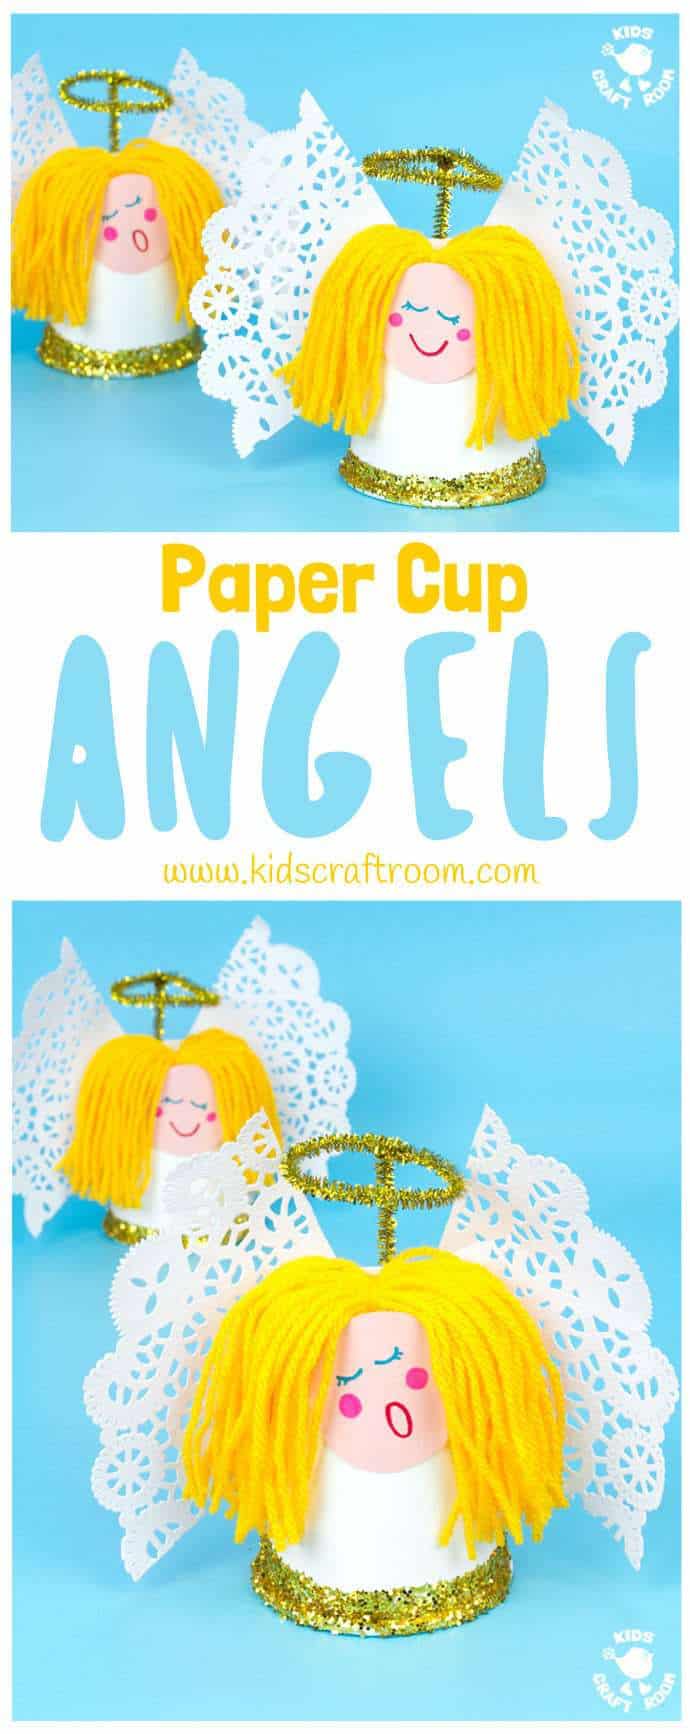 This Pretty Paper Cup Angel Craft is easy to make and looks darling! Decorate the mantlepiece, use as a Christmas tree topper or hang them as ornaments! A fun Christmas craft for preschoolers. #angel #angels #angelcrafts #christmas #christmascrafts #kidscrafts #kidscraft #papercups #kidscraftroom